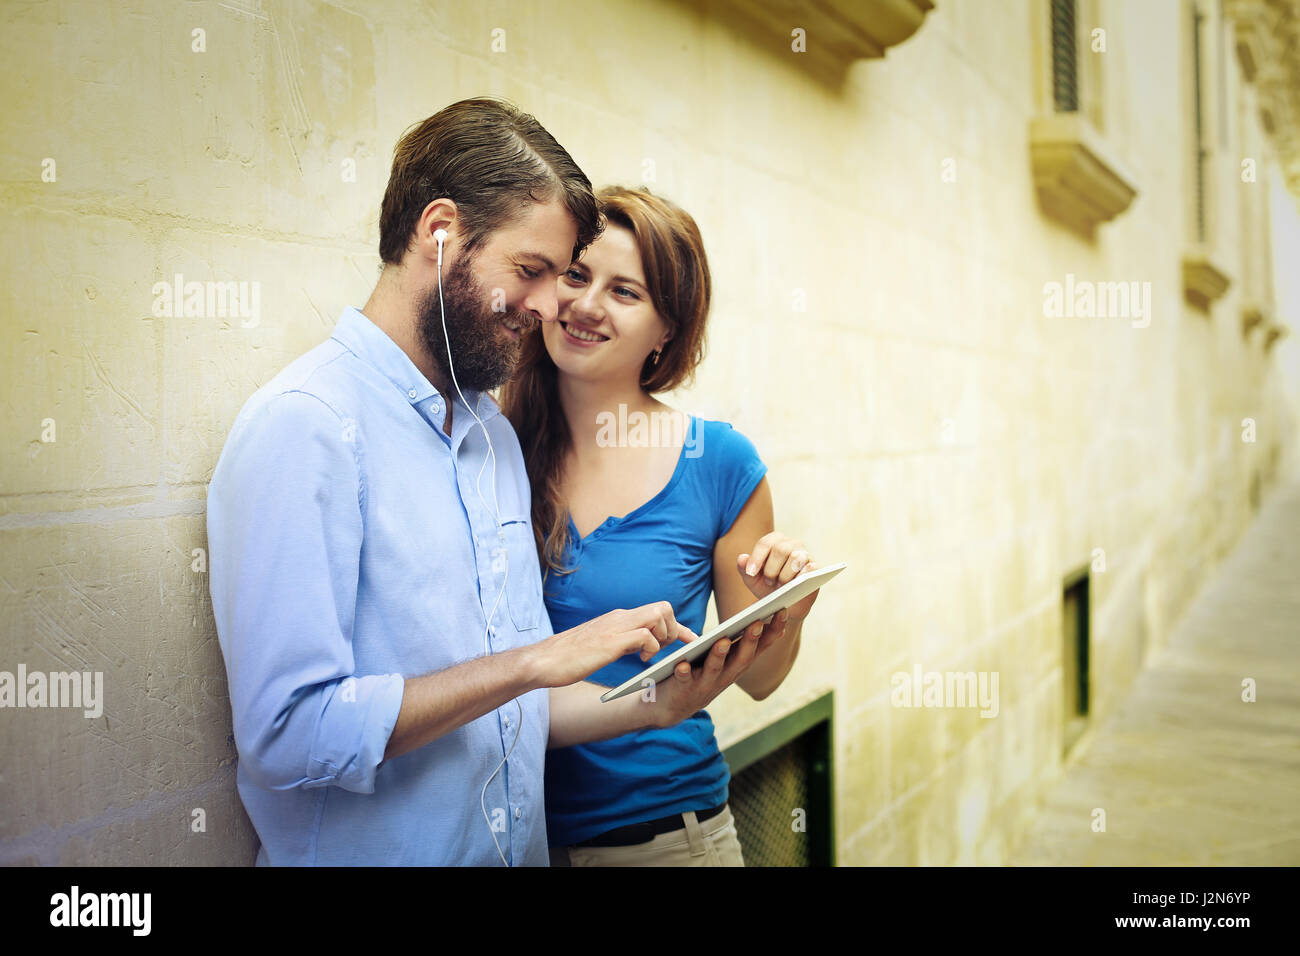 Man with tablet and woman on street Stock Photo